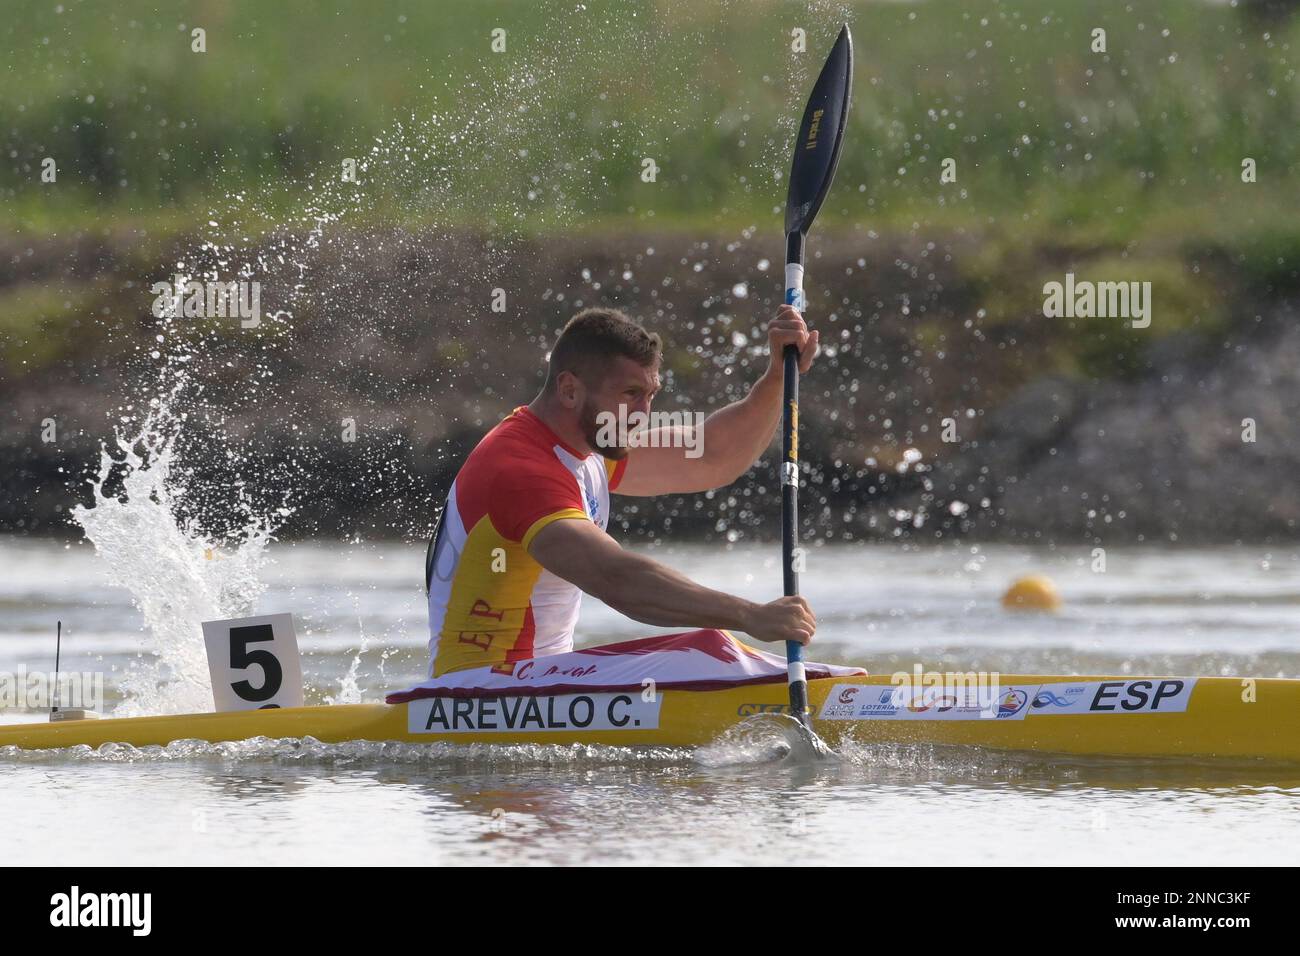 Carlos Arevalo of Spain competes in a preliminary heat of men's K1 200m  race at the the ICF Canoe Kayak Sprint World Cup in Szeged, Hungary,  Saturday, May 15, 2021. (Szilard Koszticsak/MTI